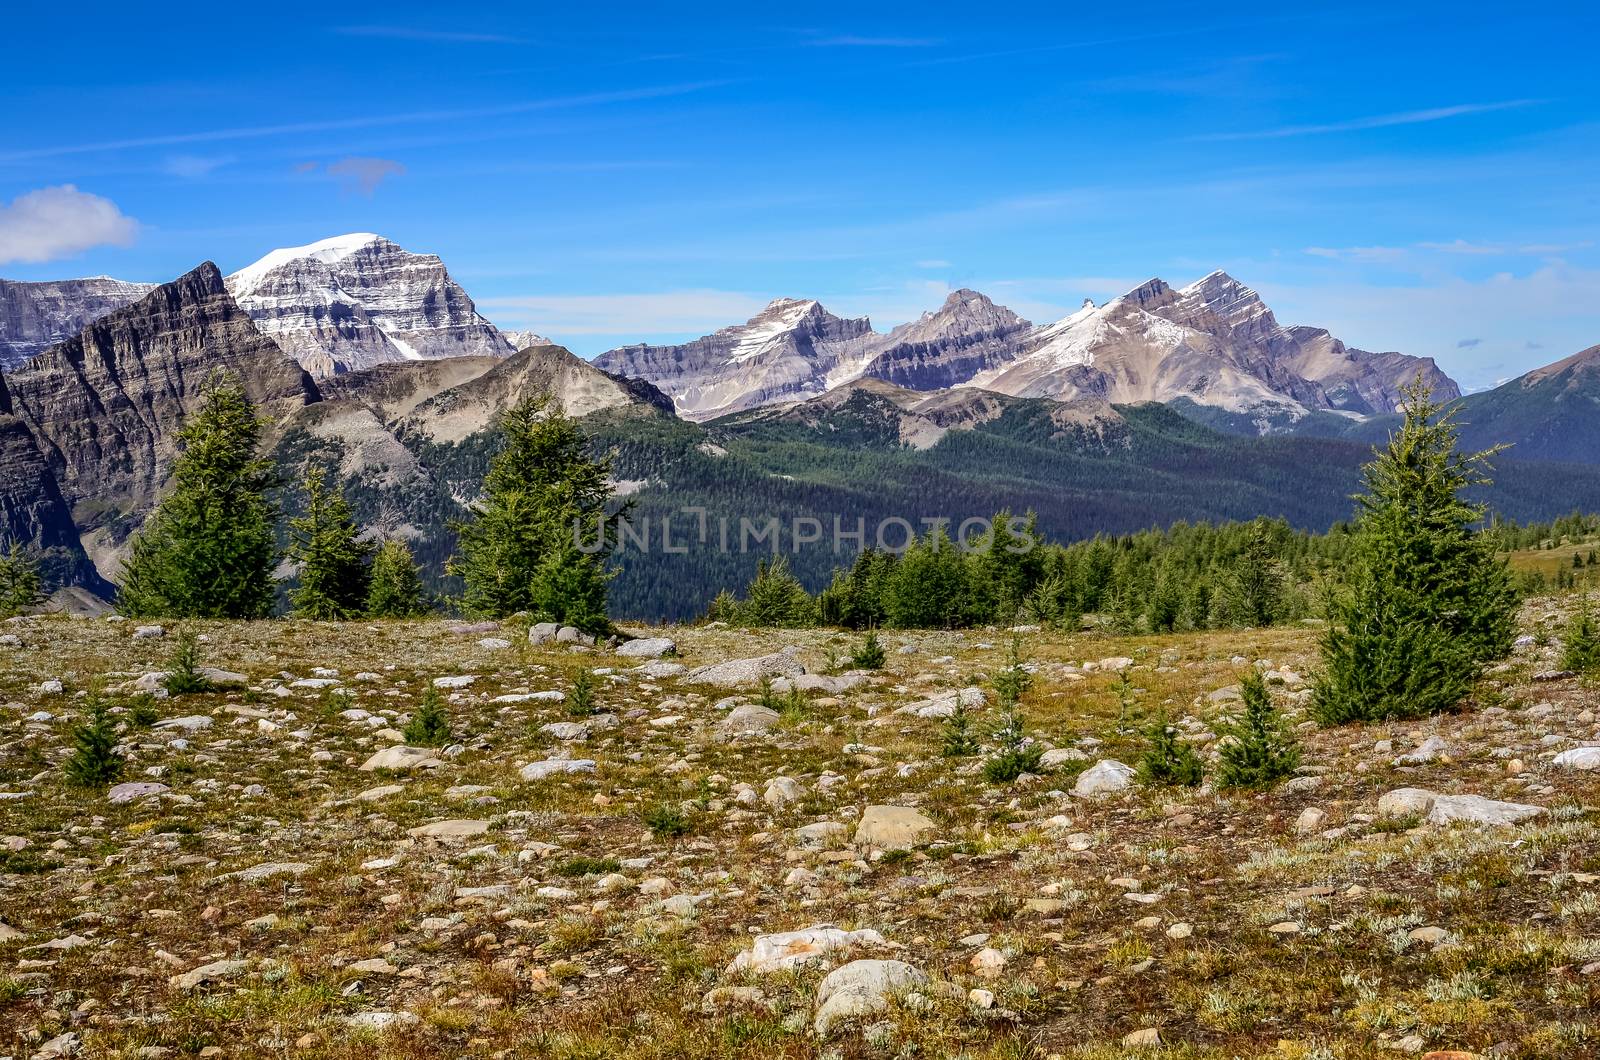 Scenic view of mountains in Banff national park near Egypt lake, Alberta, Canada